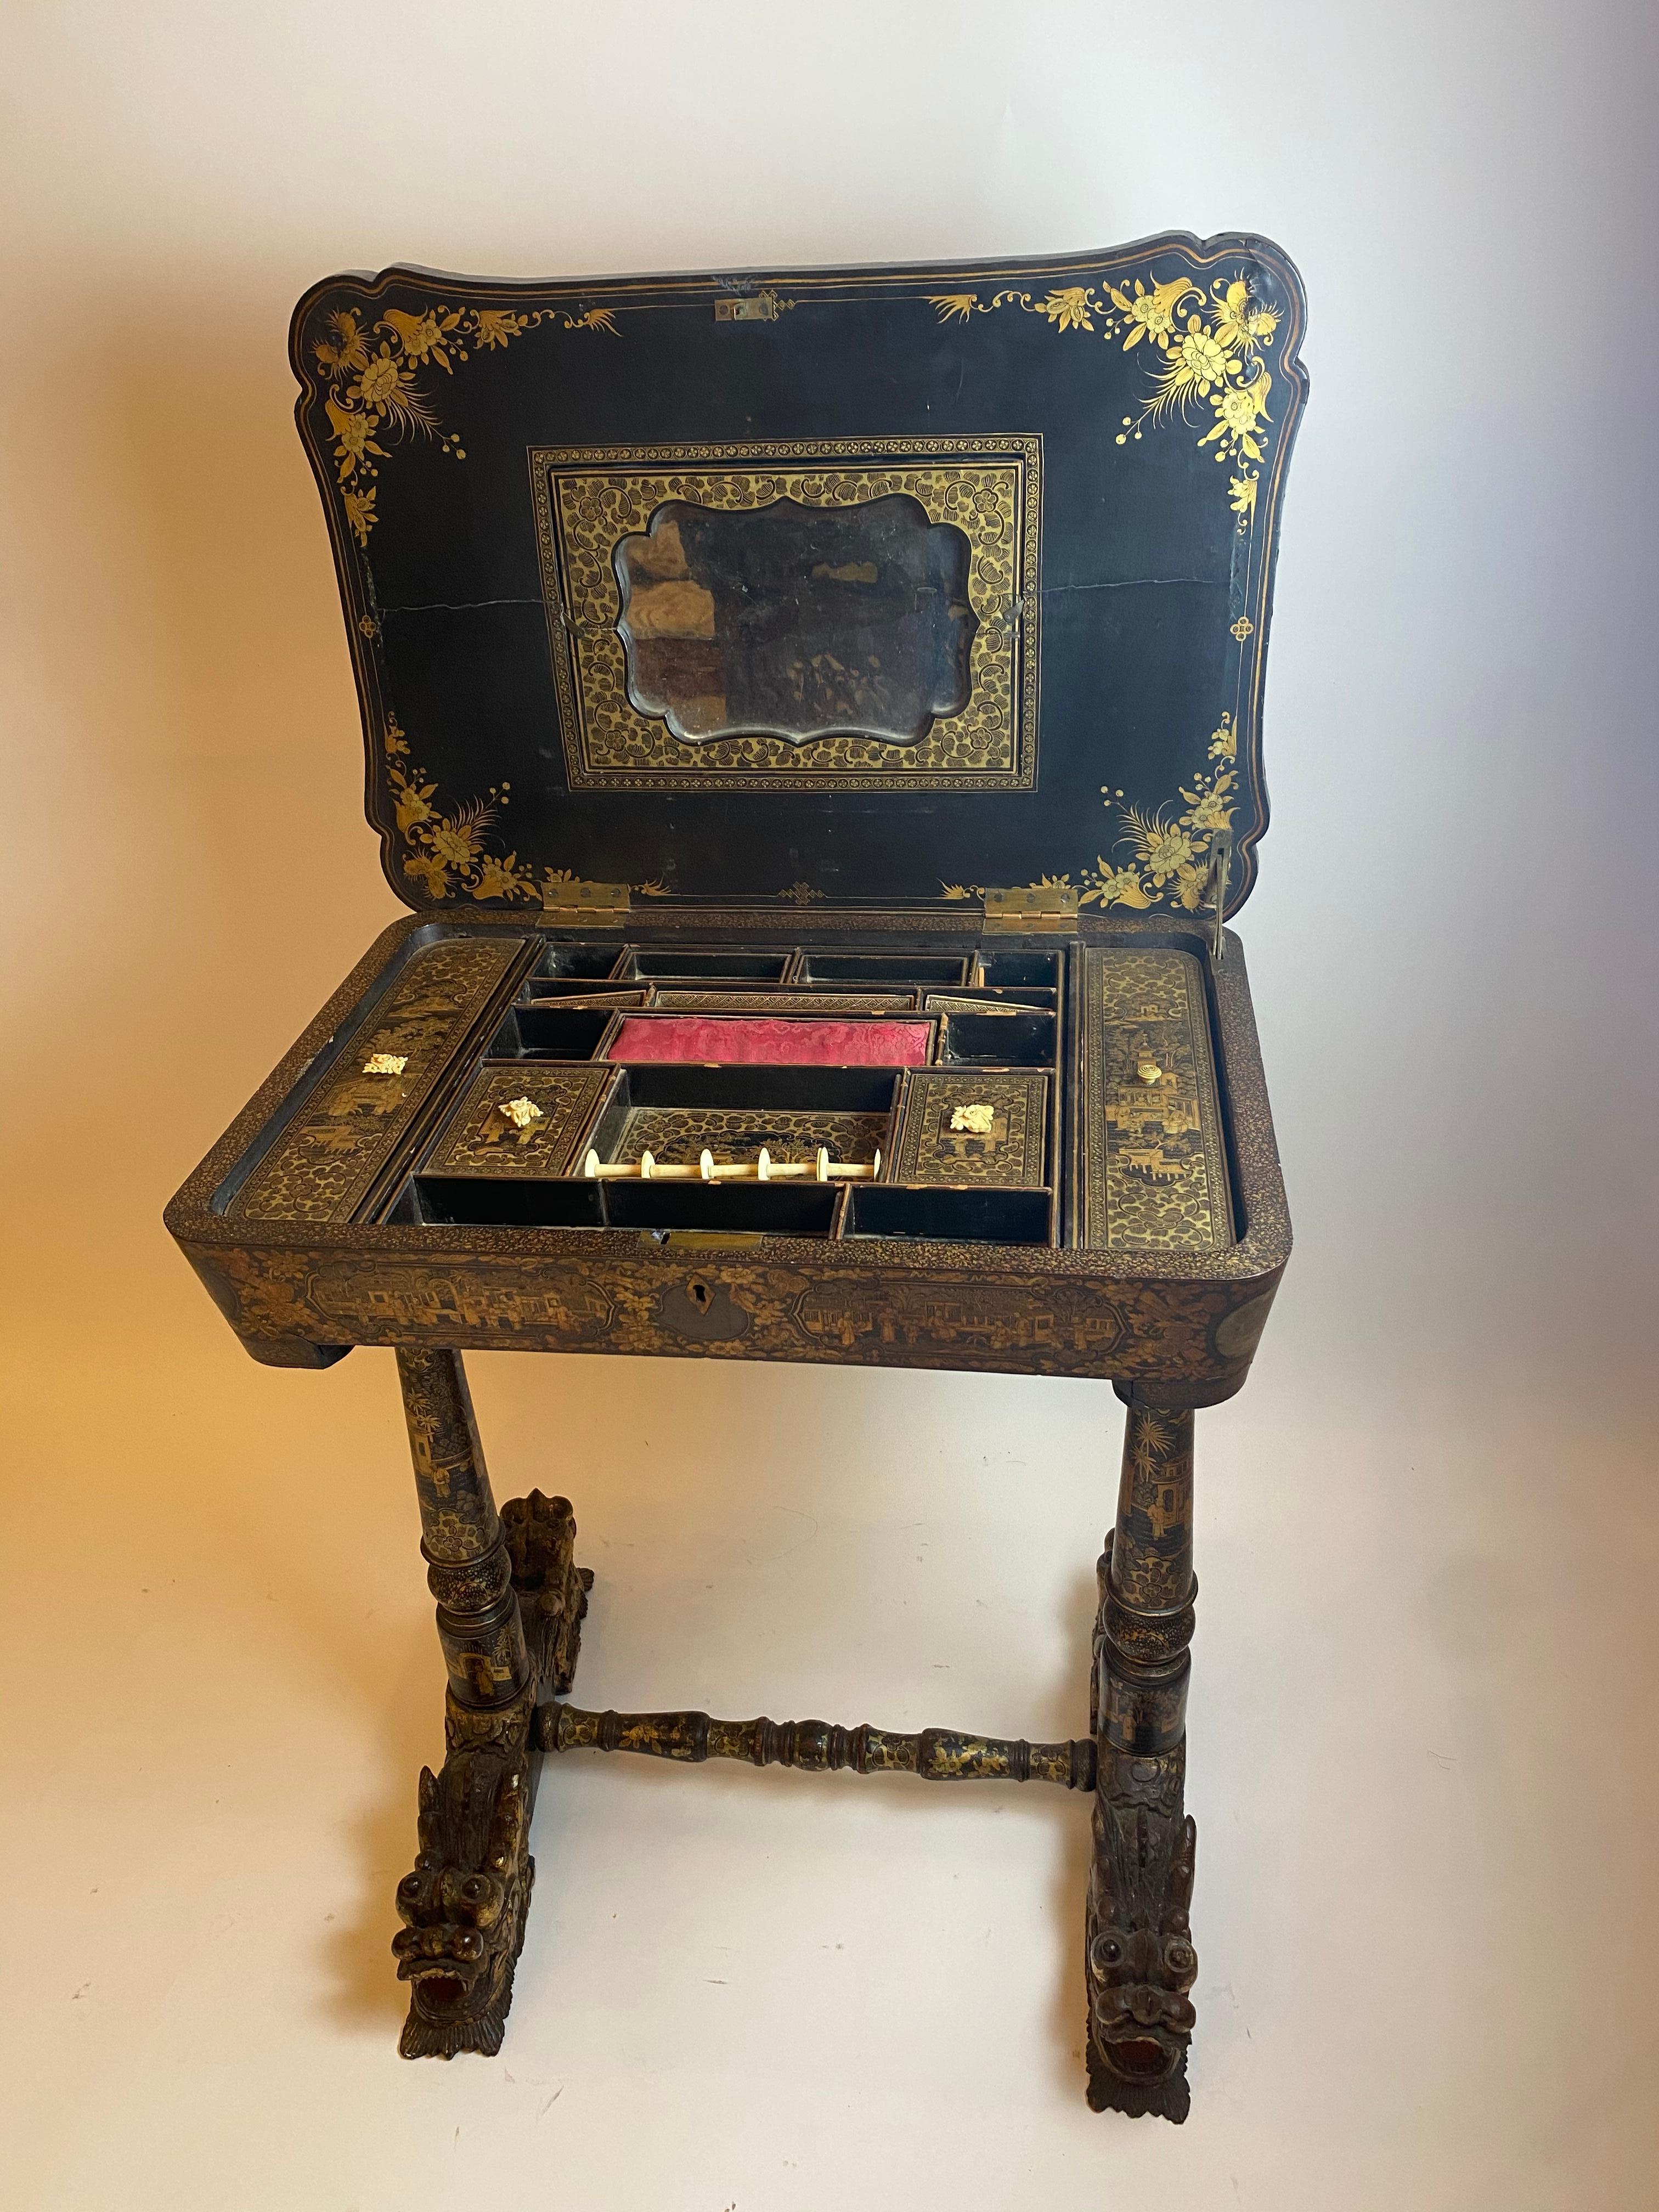 Early 19th Century Chinese Export Lacquer and Gilt Work Table For Sale 3